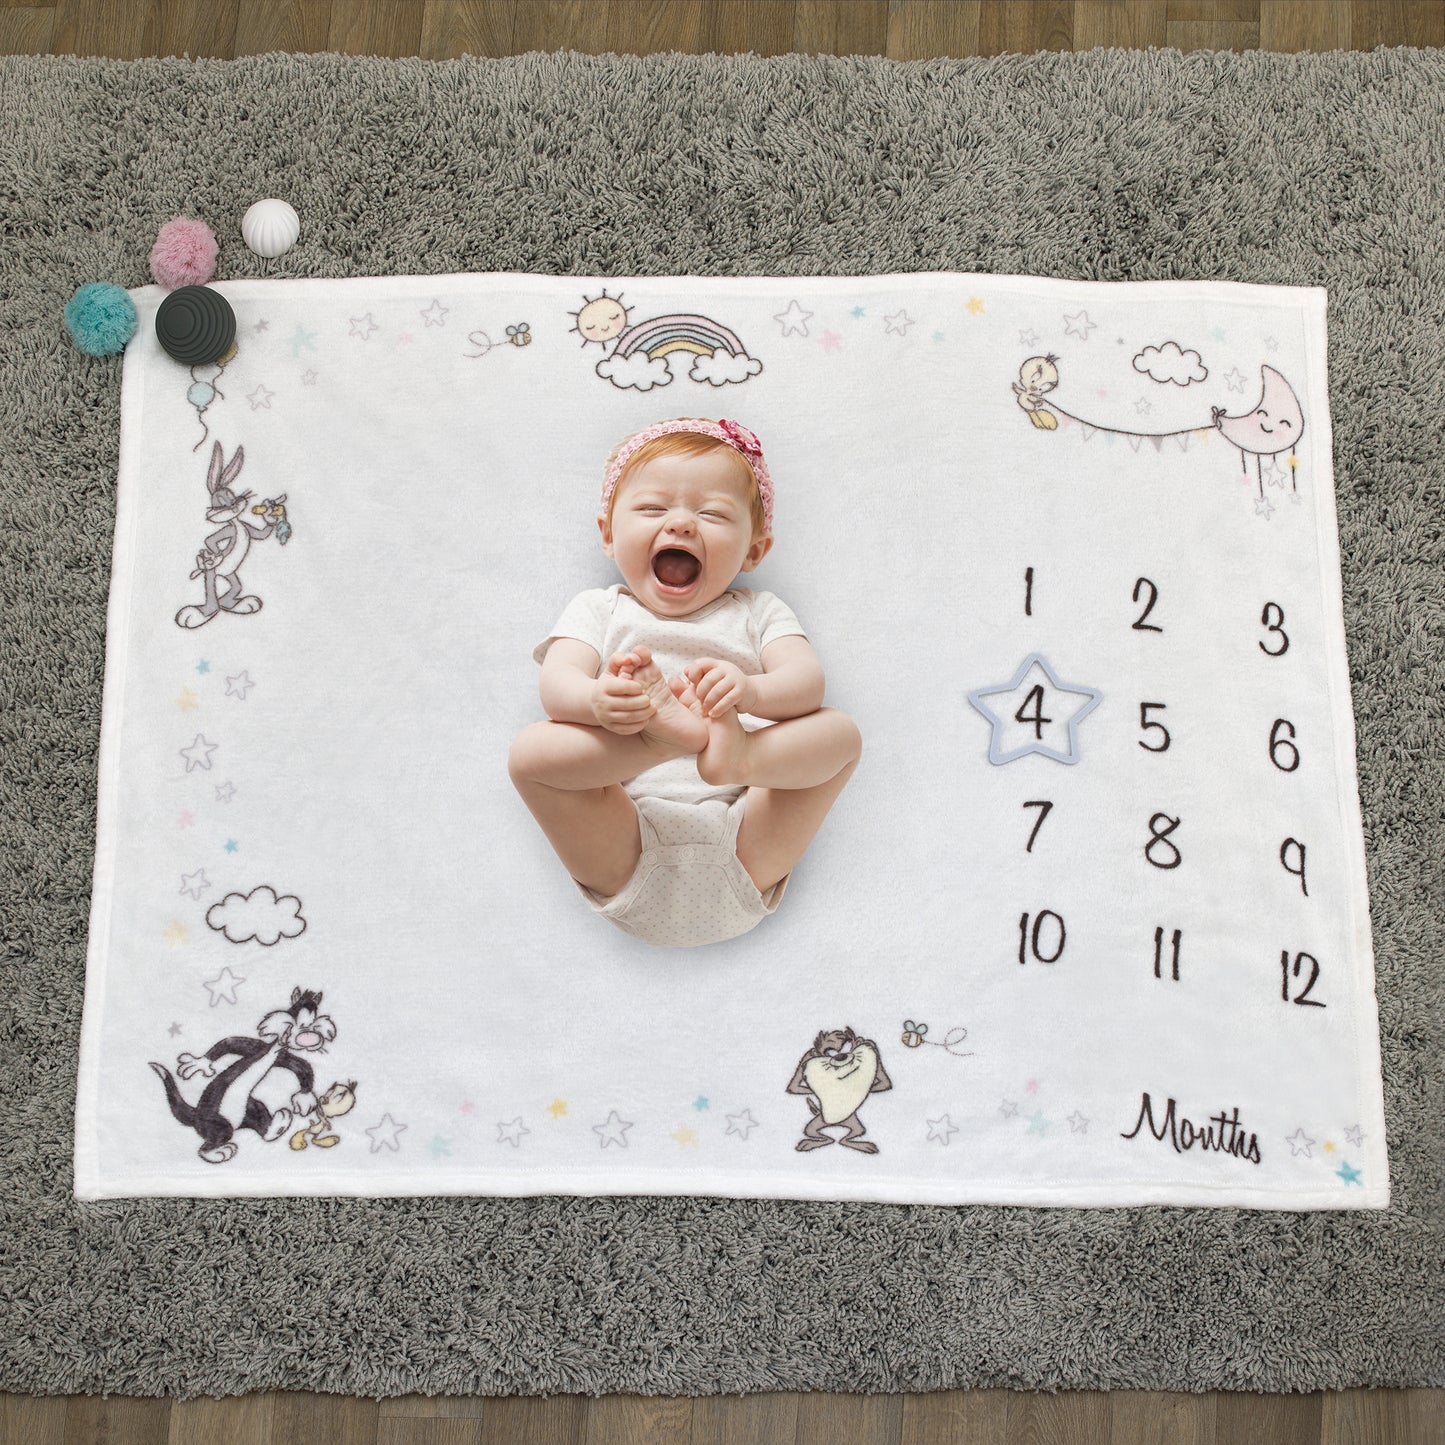 Warner Brothers Looney Tunes Best Buds White with Pastel Blue, Pink, and Yellow Bugs Bunny, Tweety, Tasmanian Devil, and Sylvester the Cat Milestone Blanket